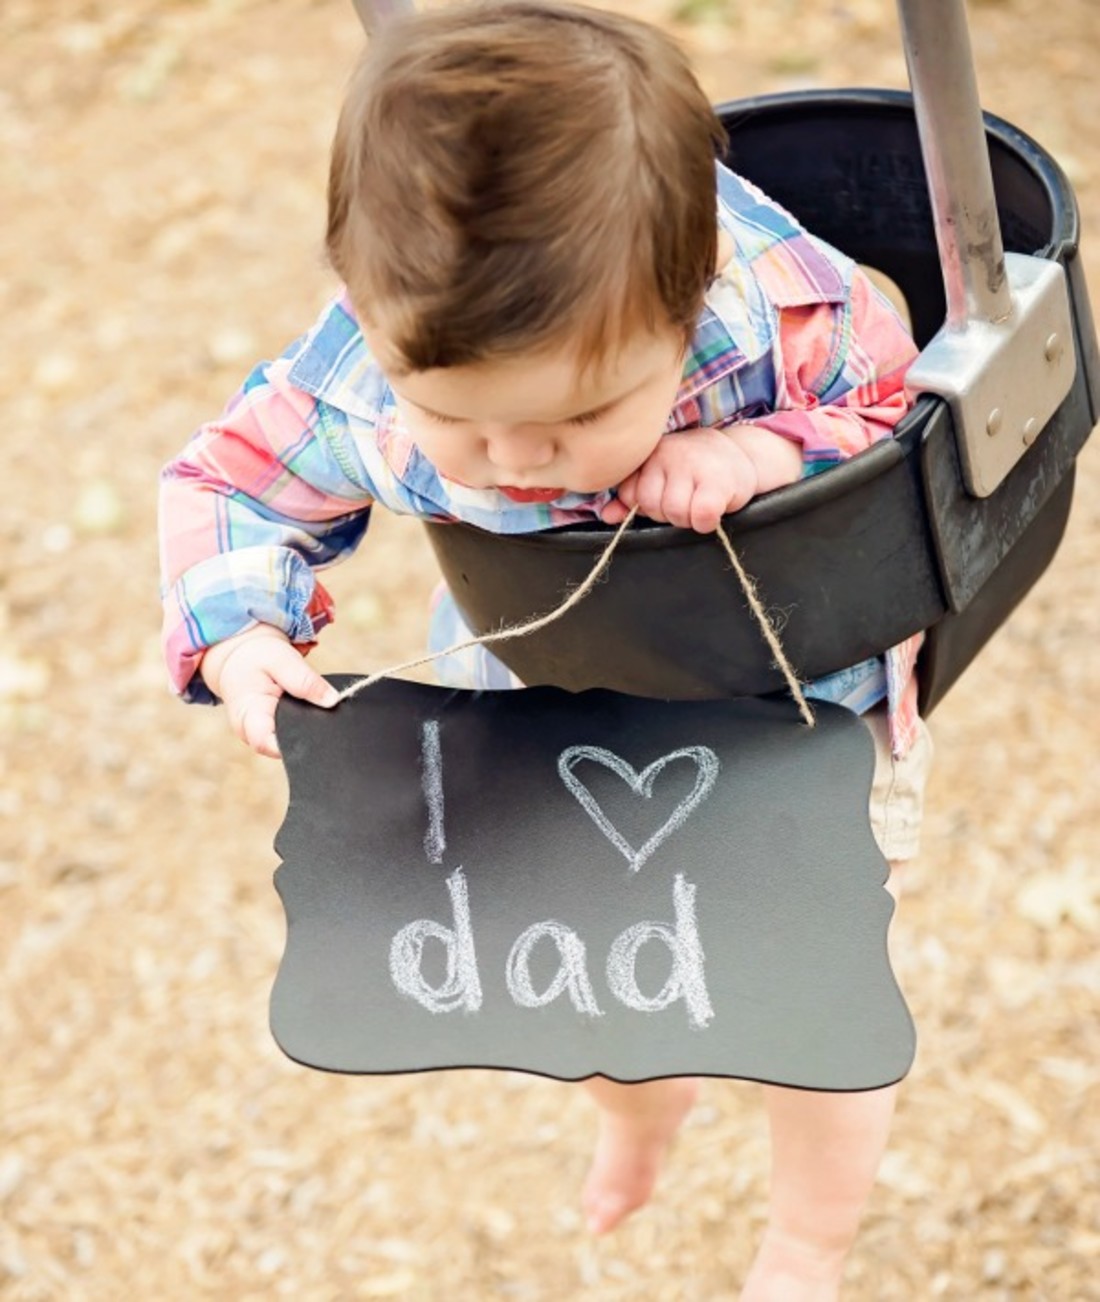 20 Ways to Make Dads First Fathers Day Special